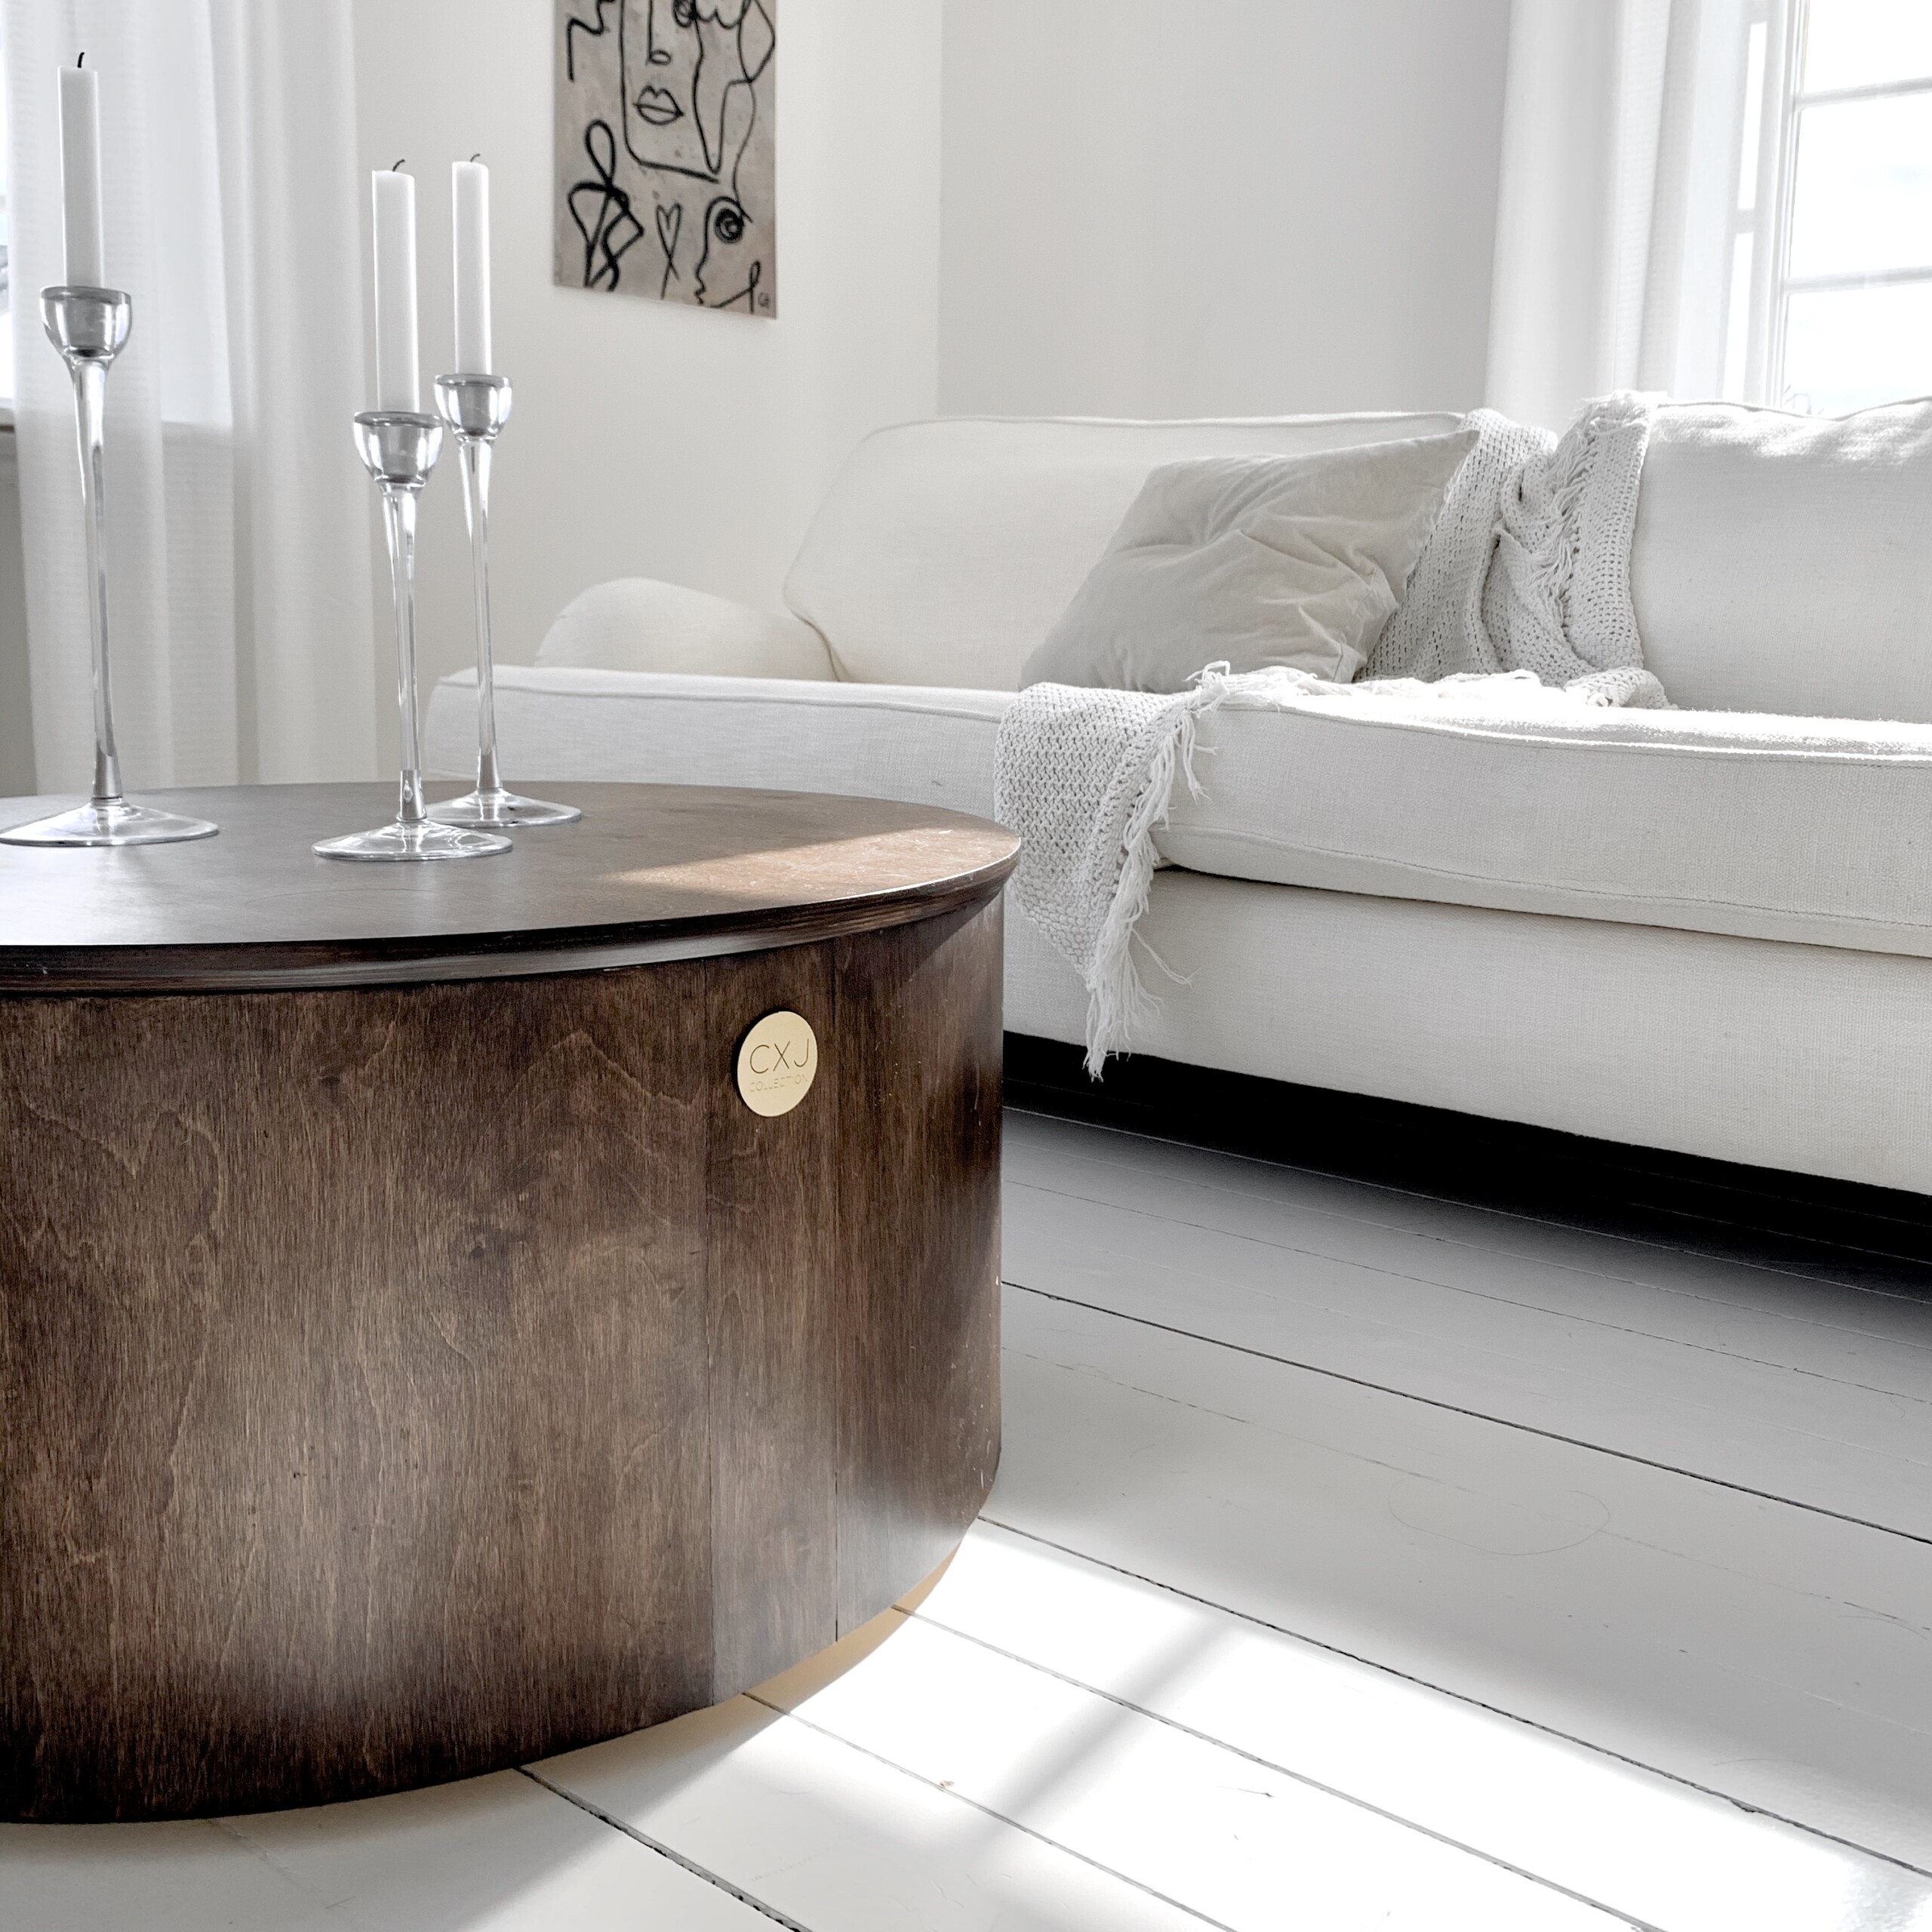 Signe coffee table